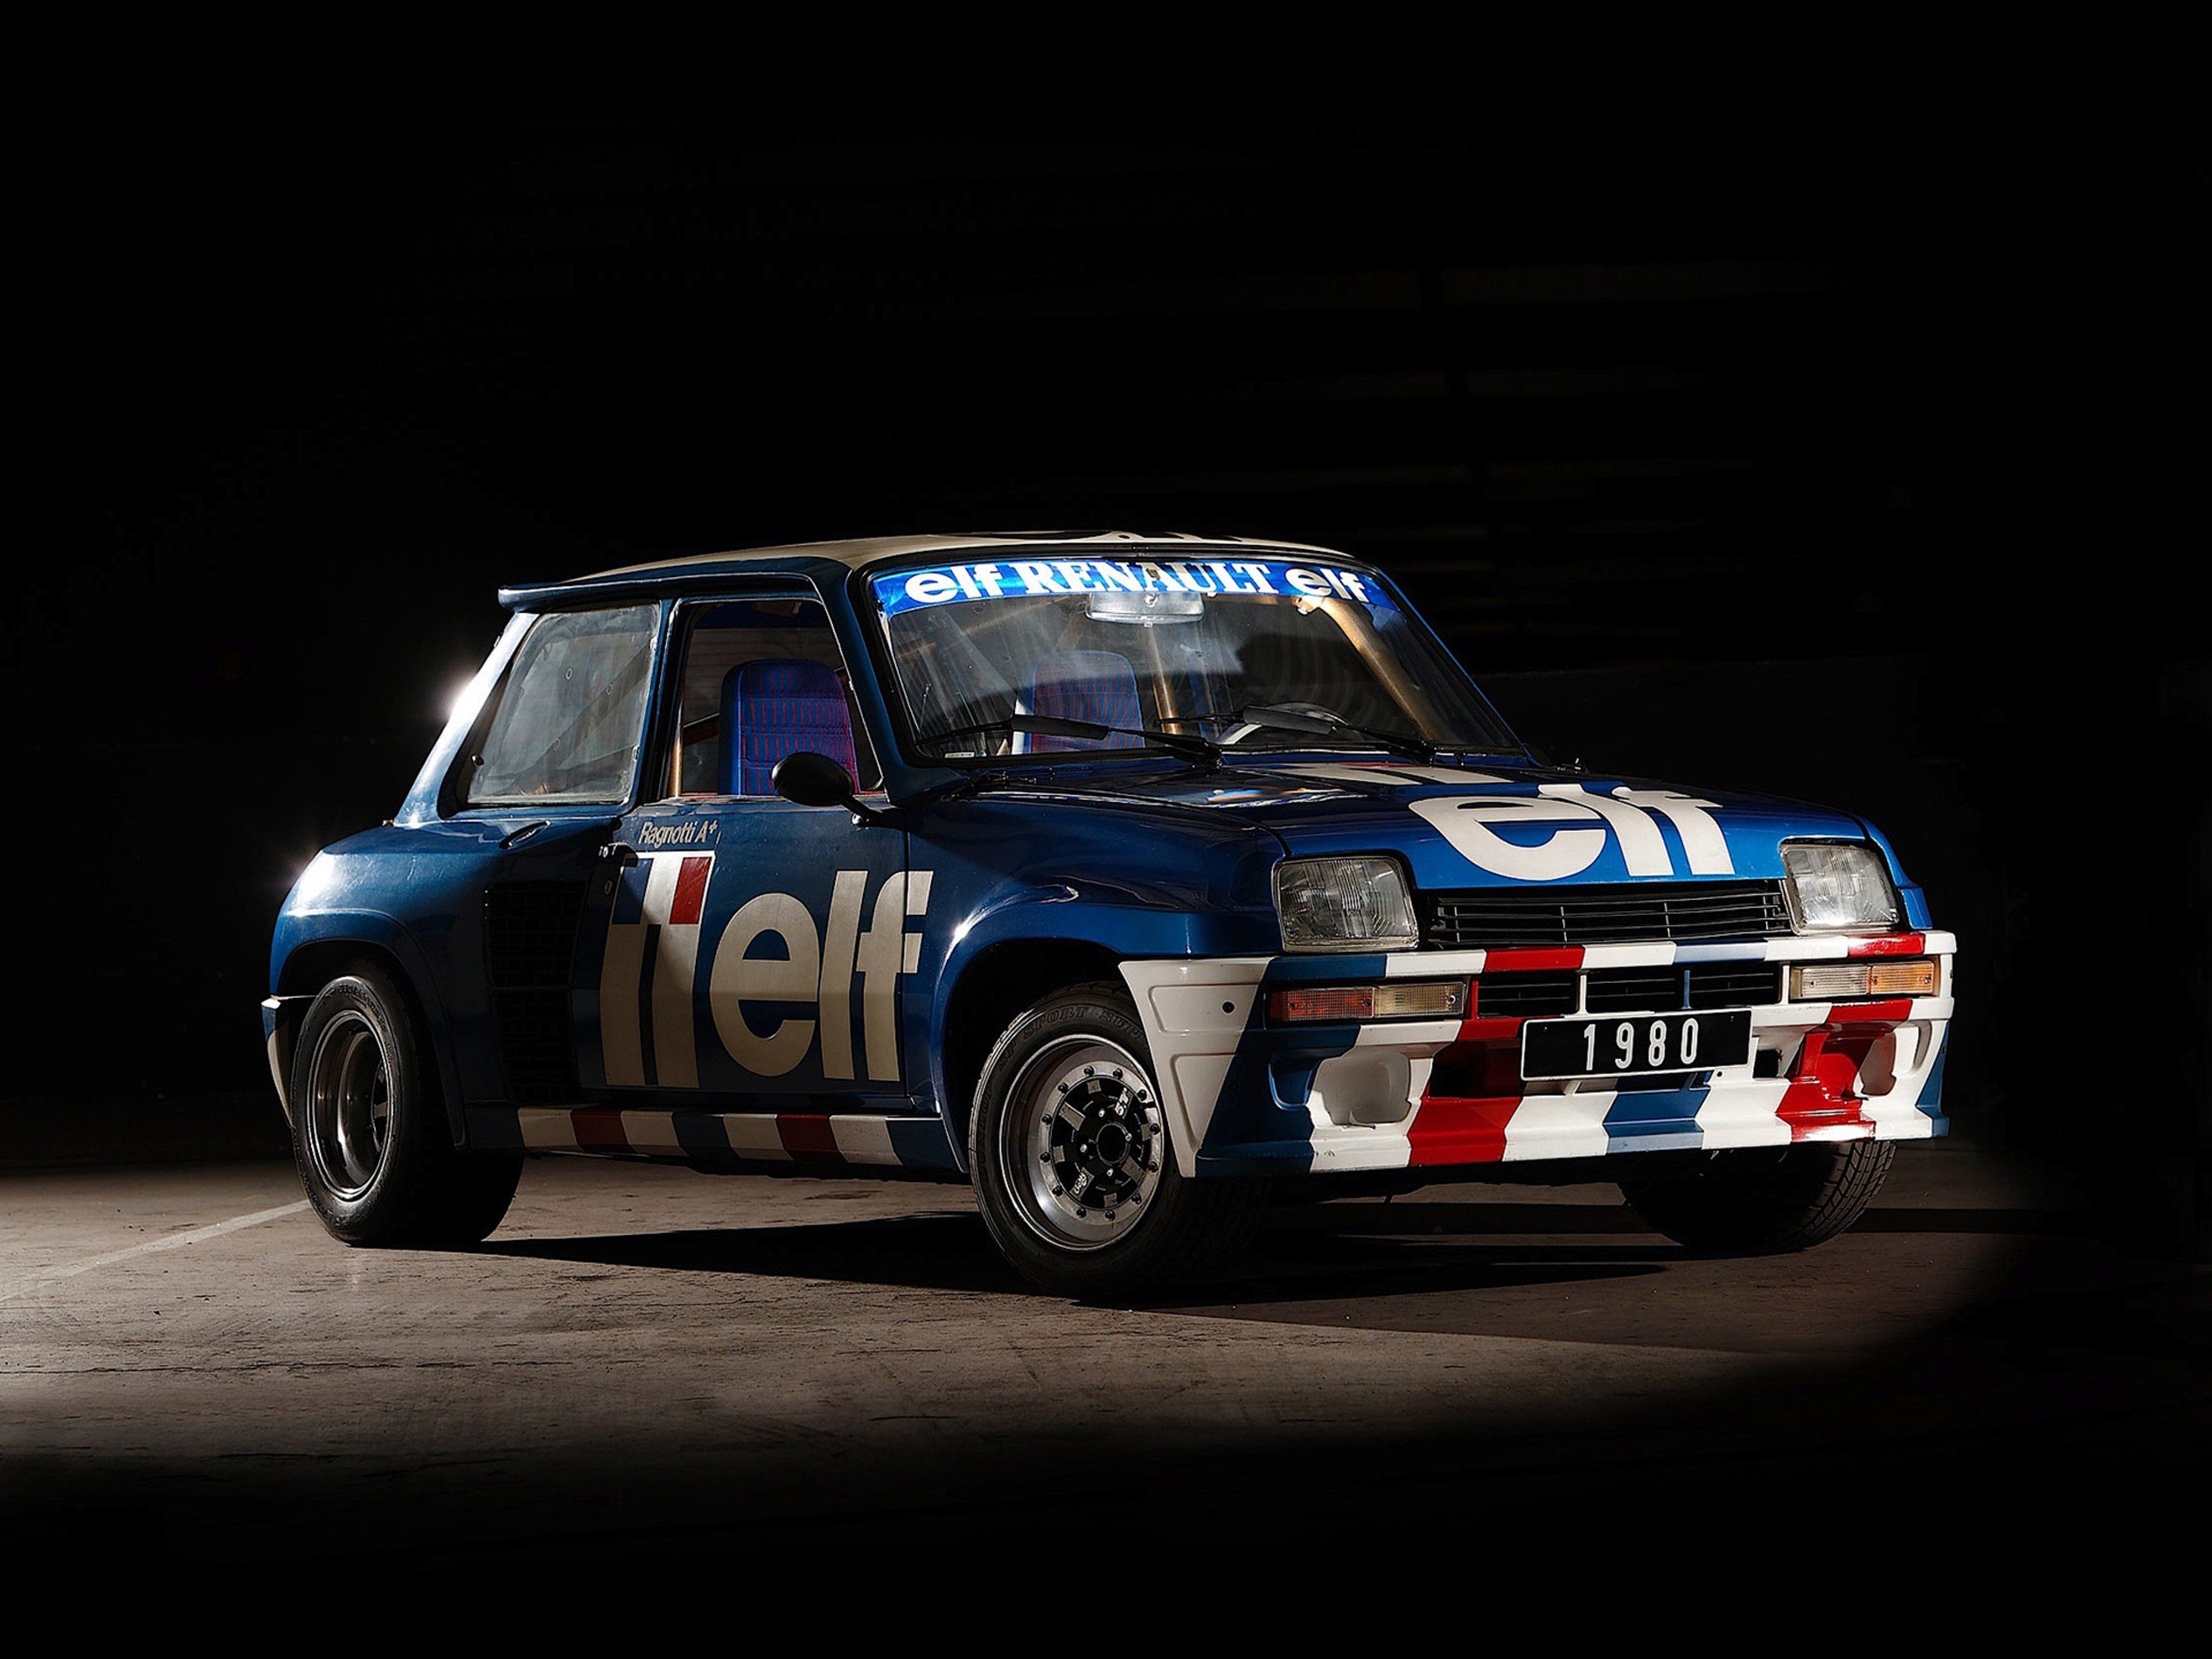 turbo wallpaper. Renault Coches renault, Renault 5 turbo